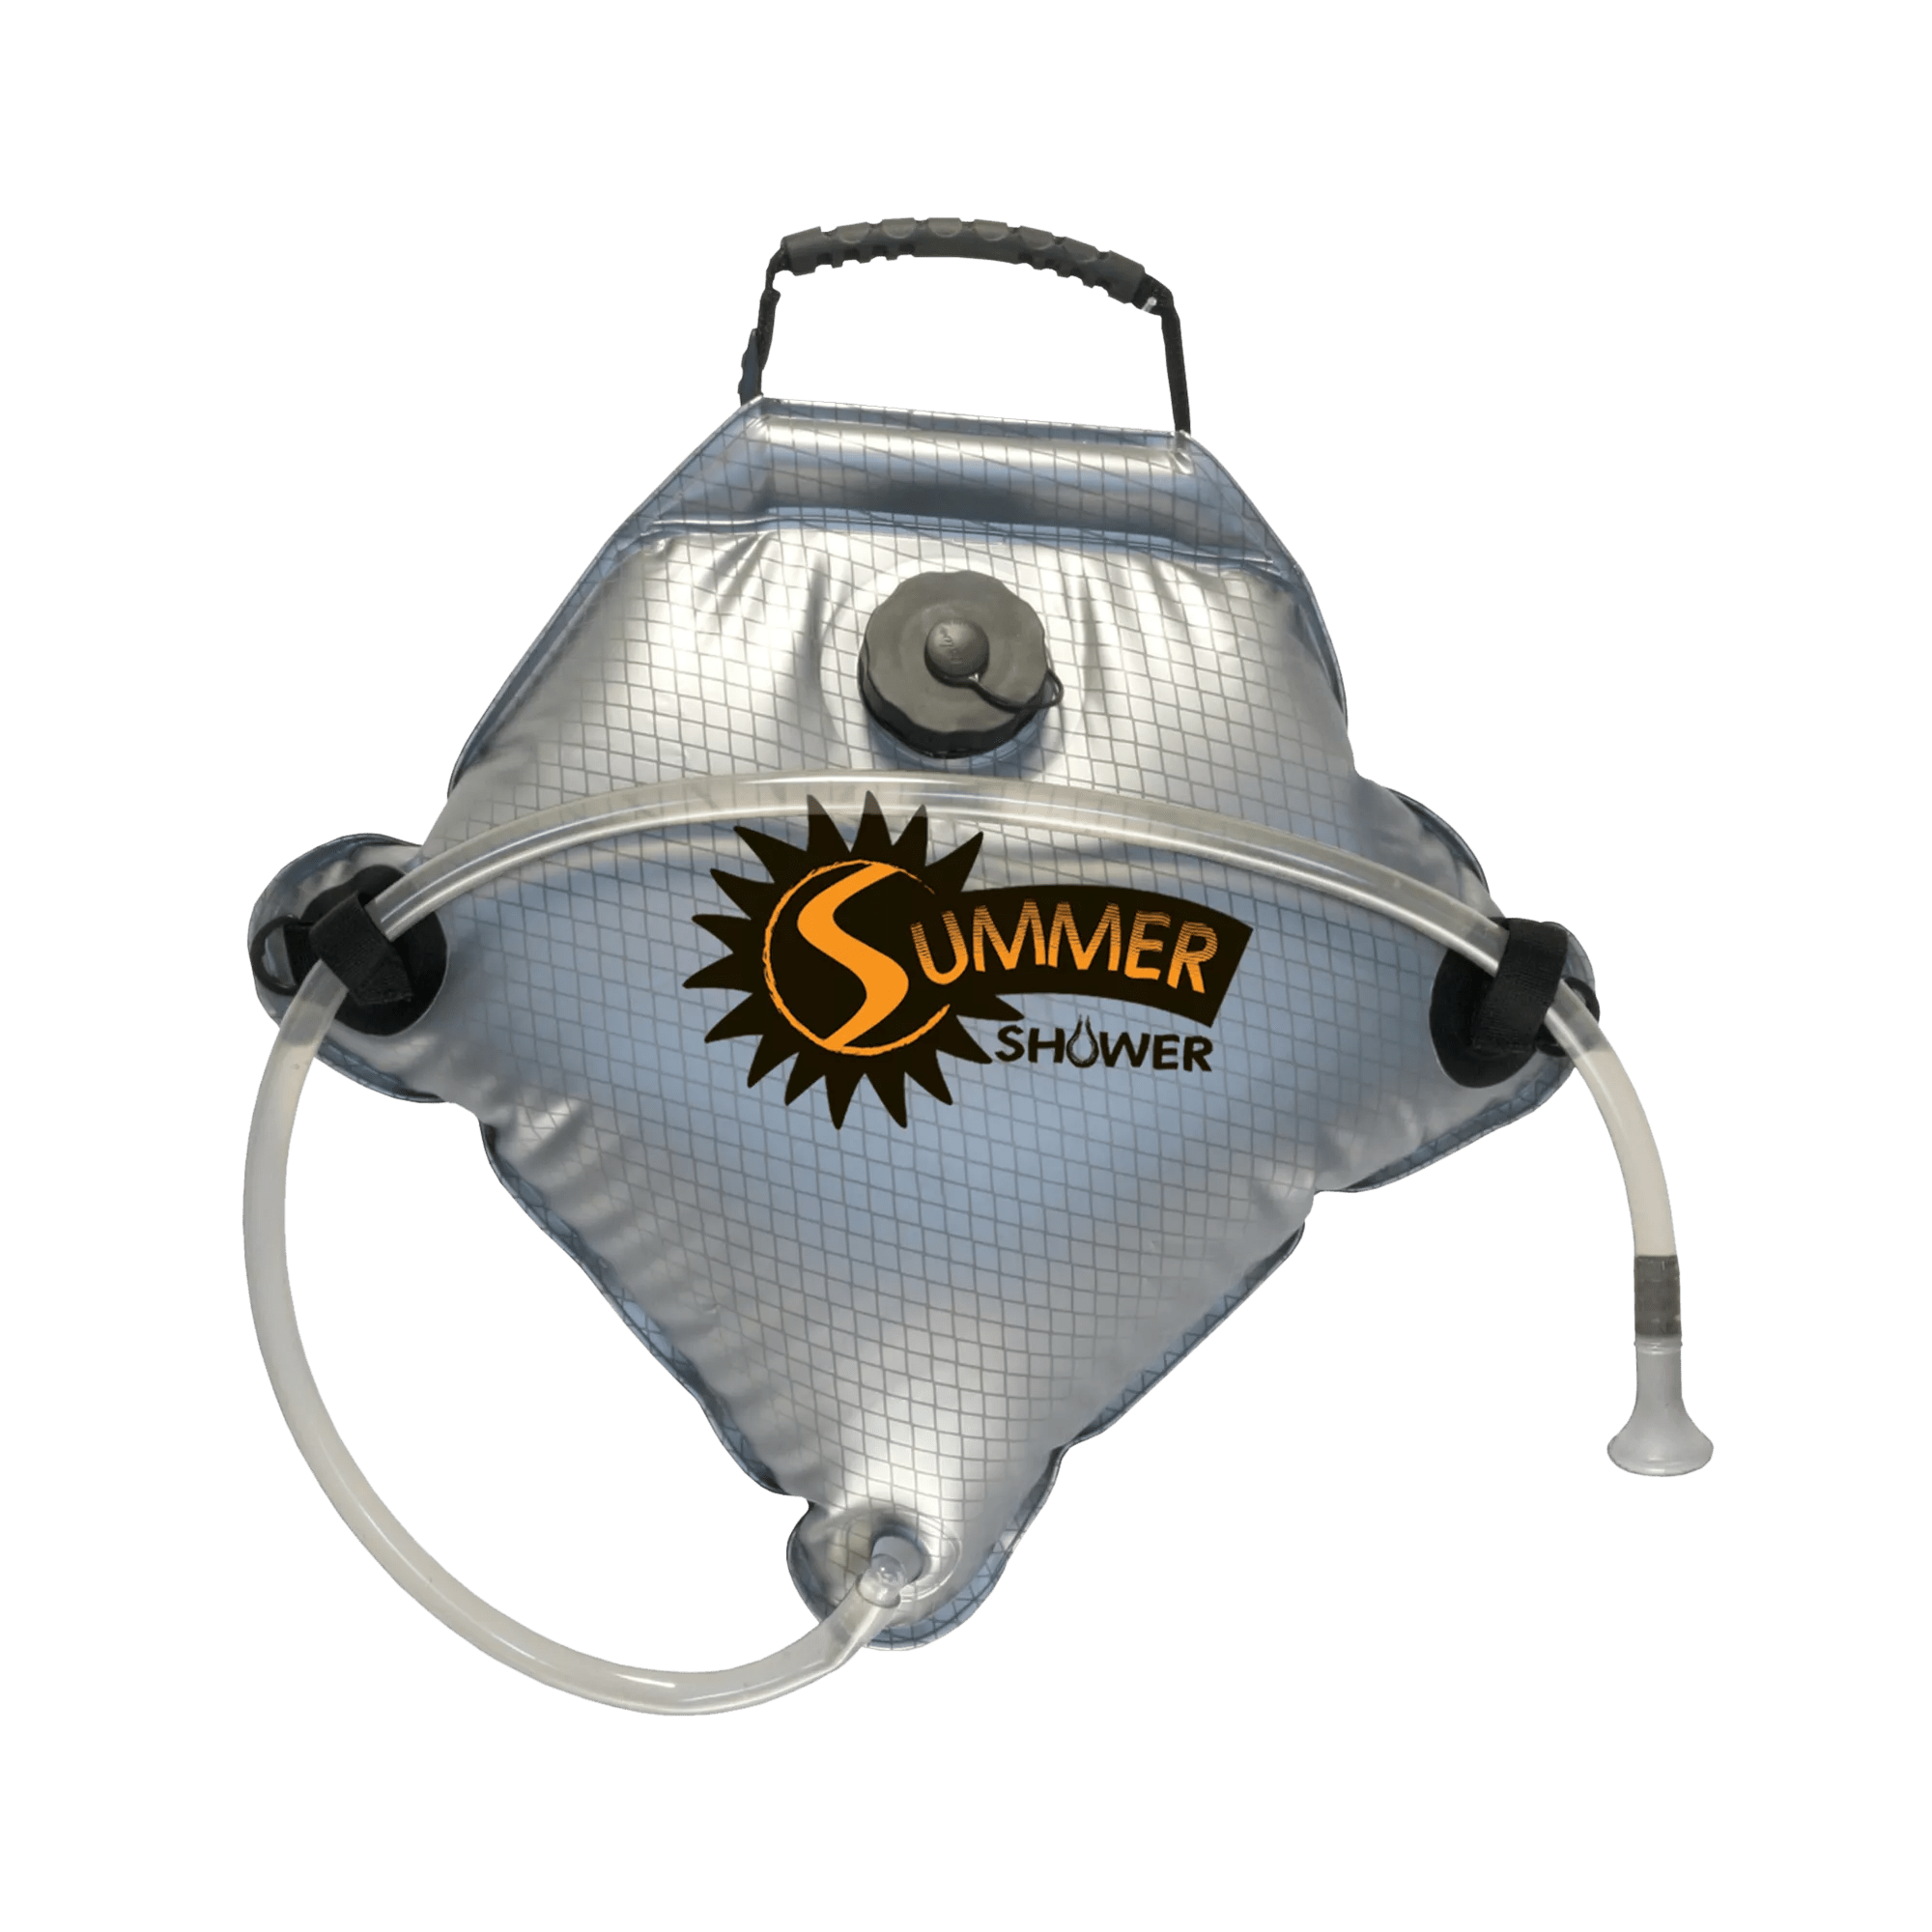 ADVANCED ELEMENTS - 2.5 Gallon Summer Shower (9.5L) -  - SS760 - ISO 